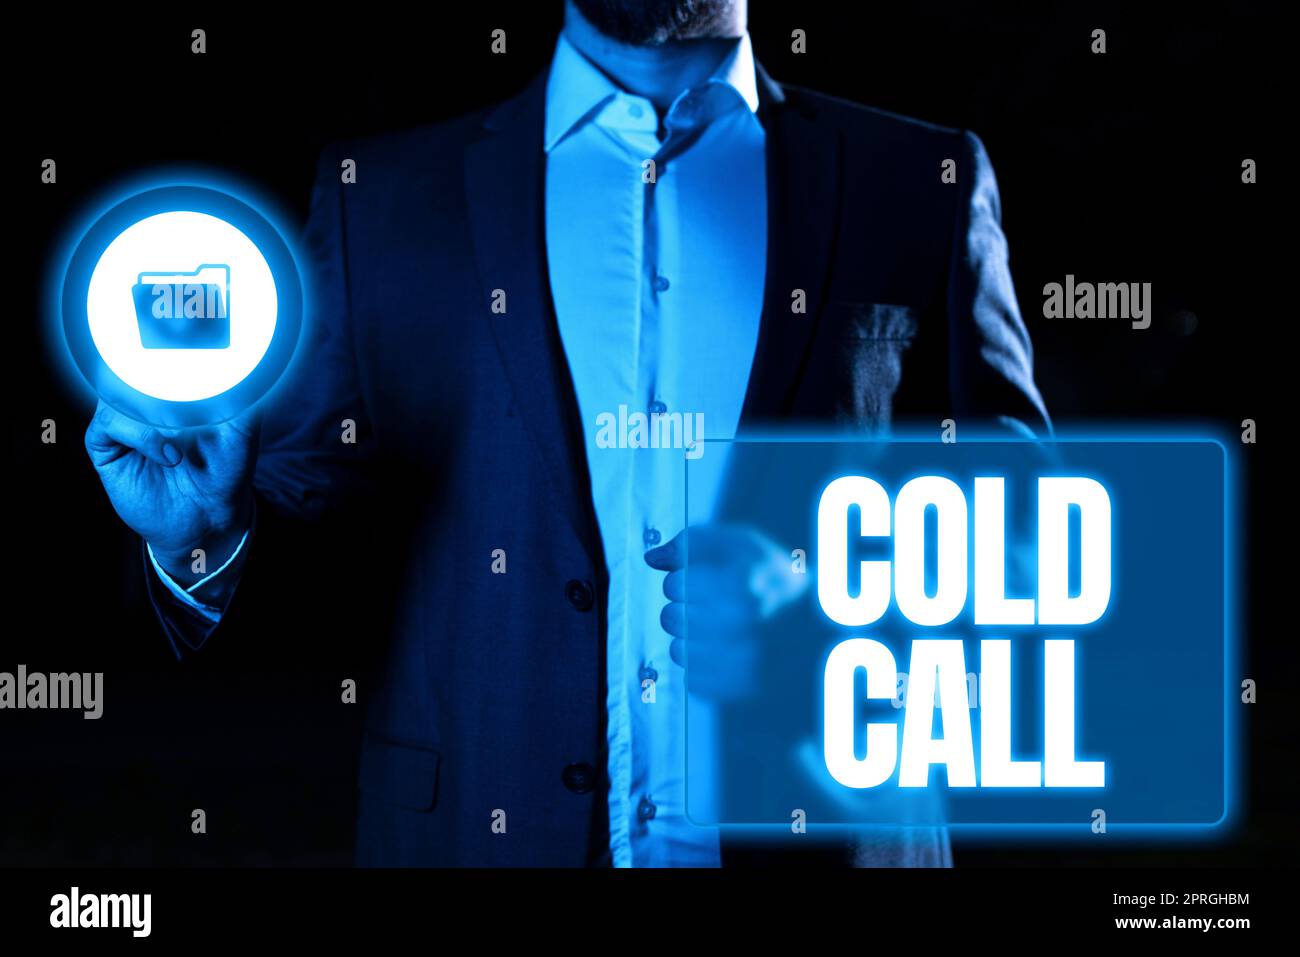 Inspiration showing sign Cold Call, Concept meaning Unsolicited call made by someone trying to sell goods or services Stock Photo